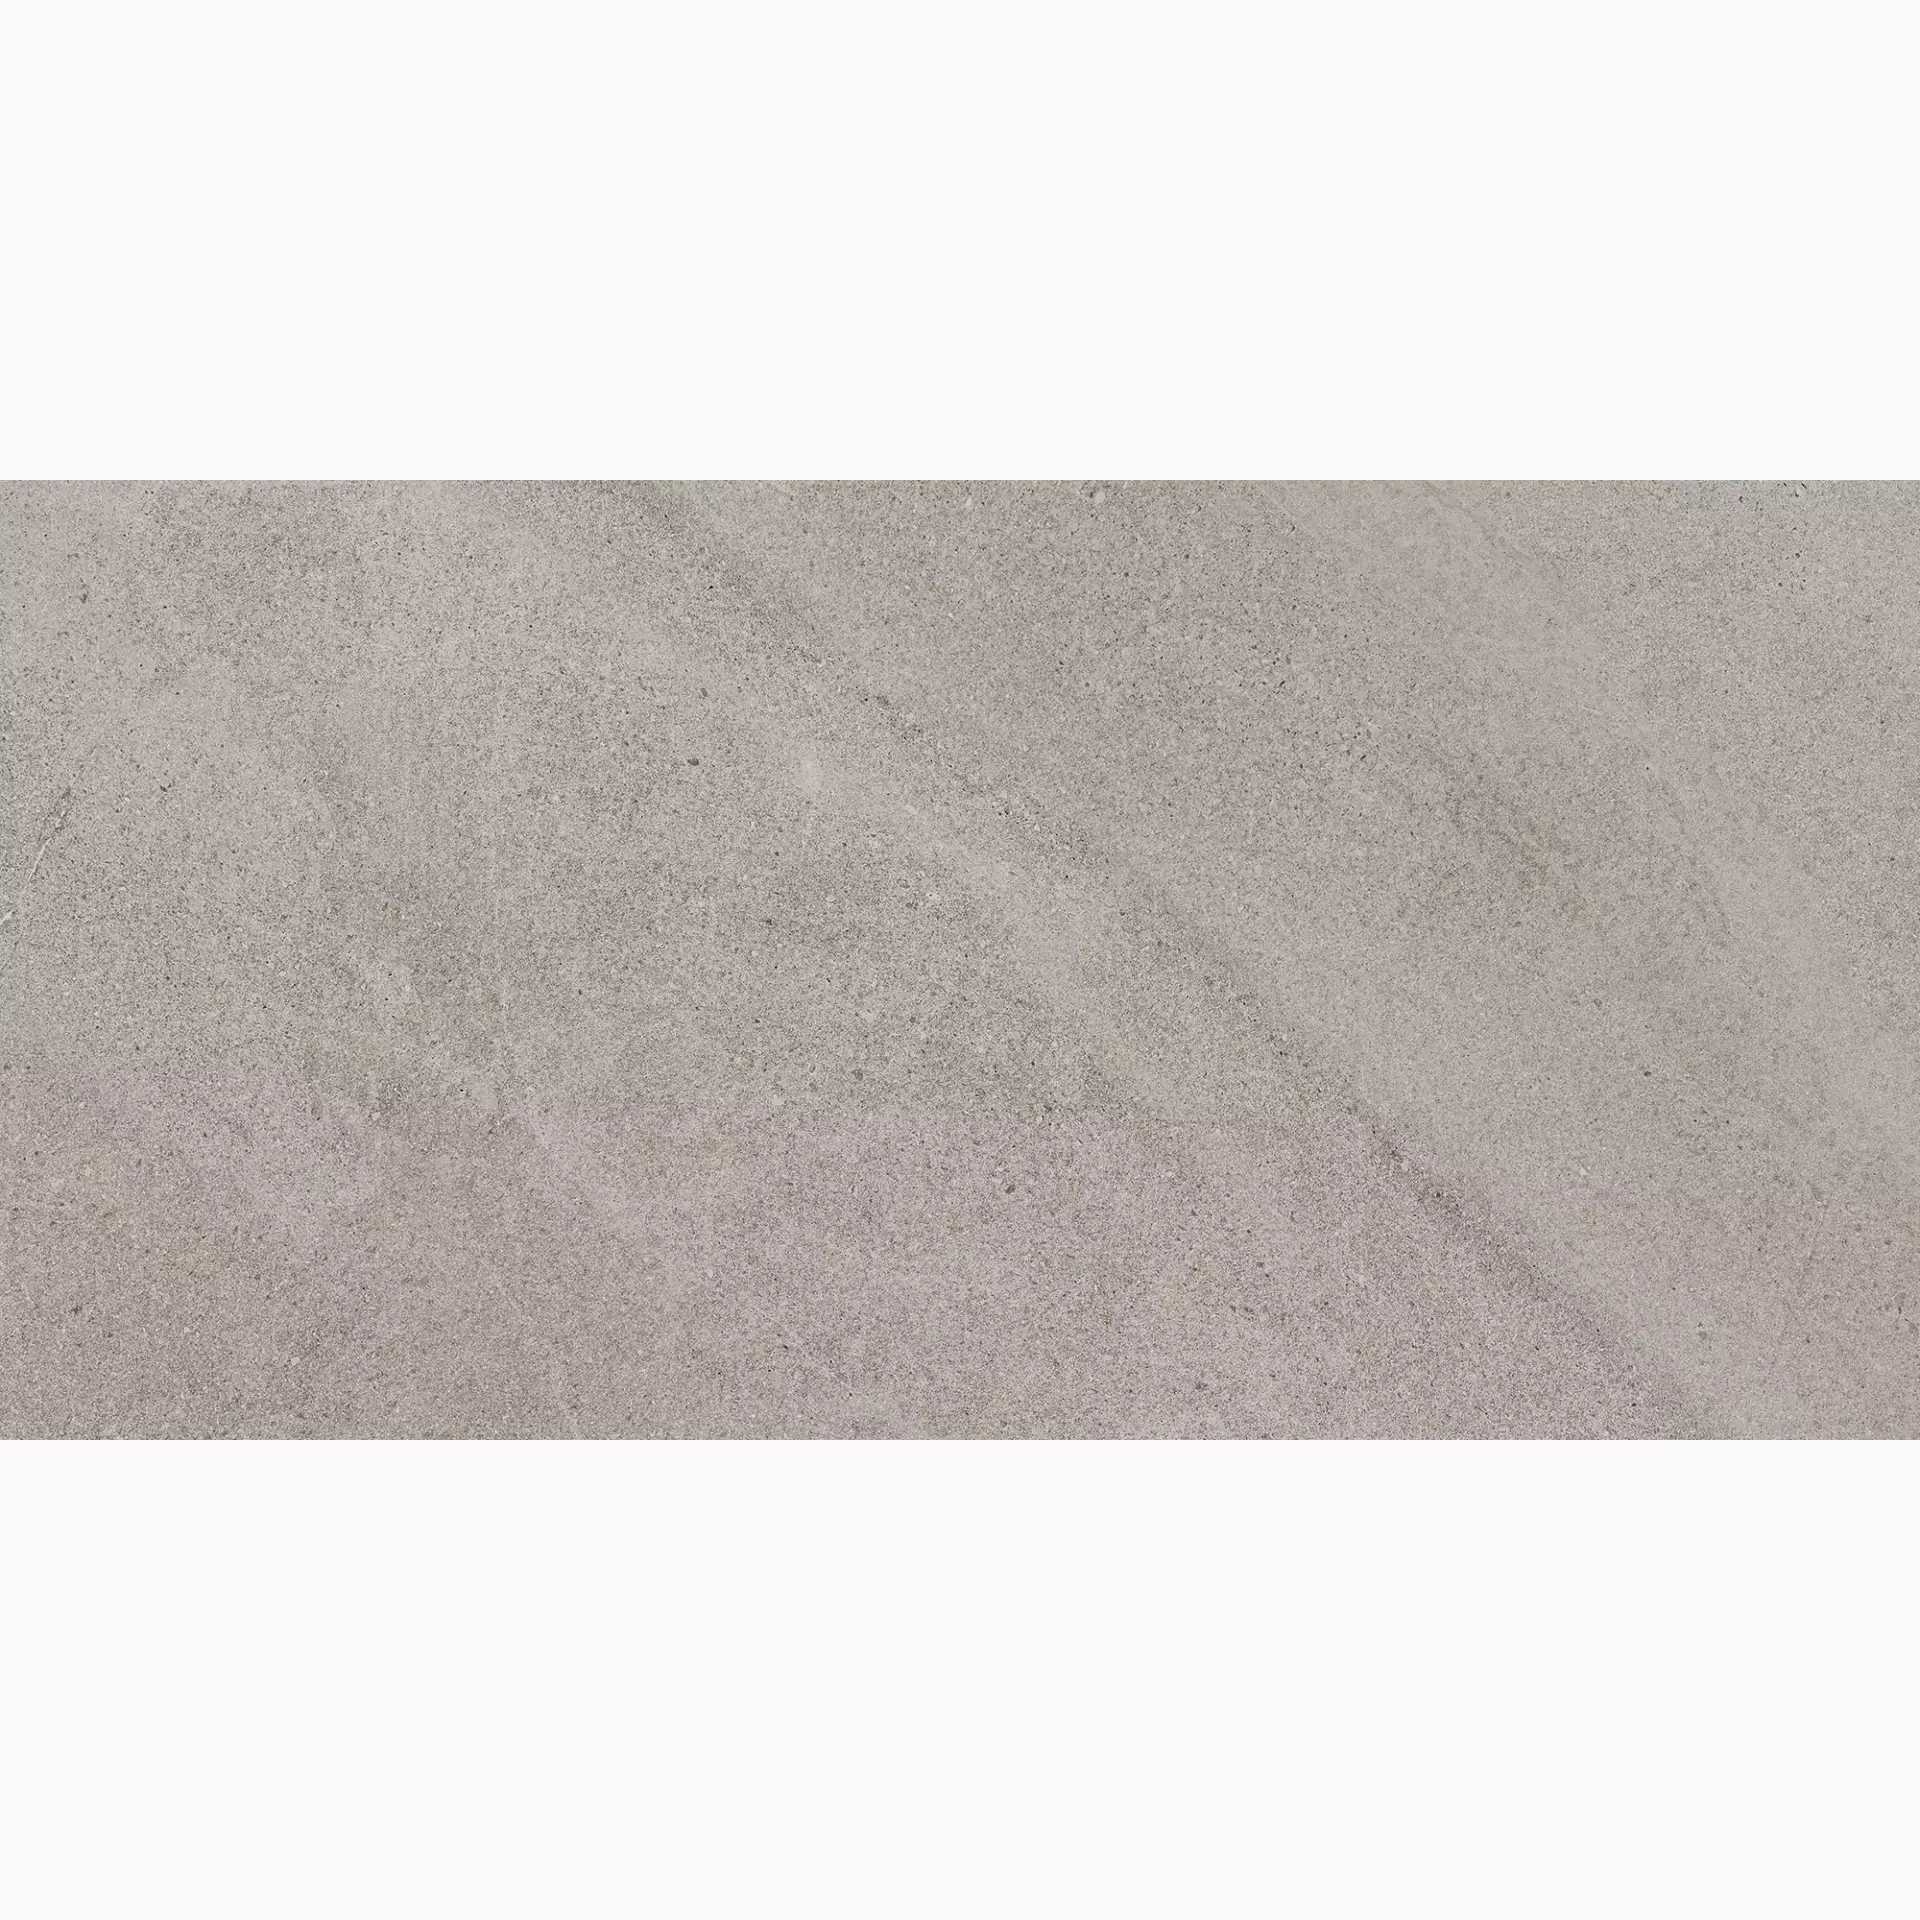 Cottodeste Limestone Oyster Honed Protect EGXLSH2 60x120cm rectified 14mm